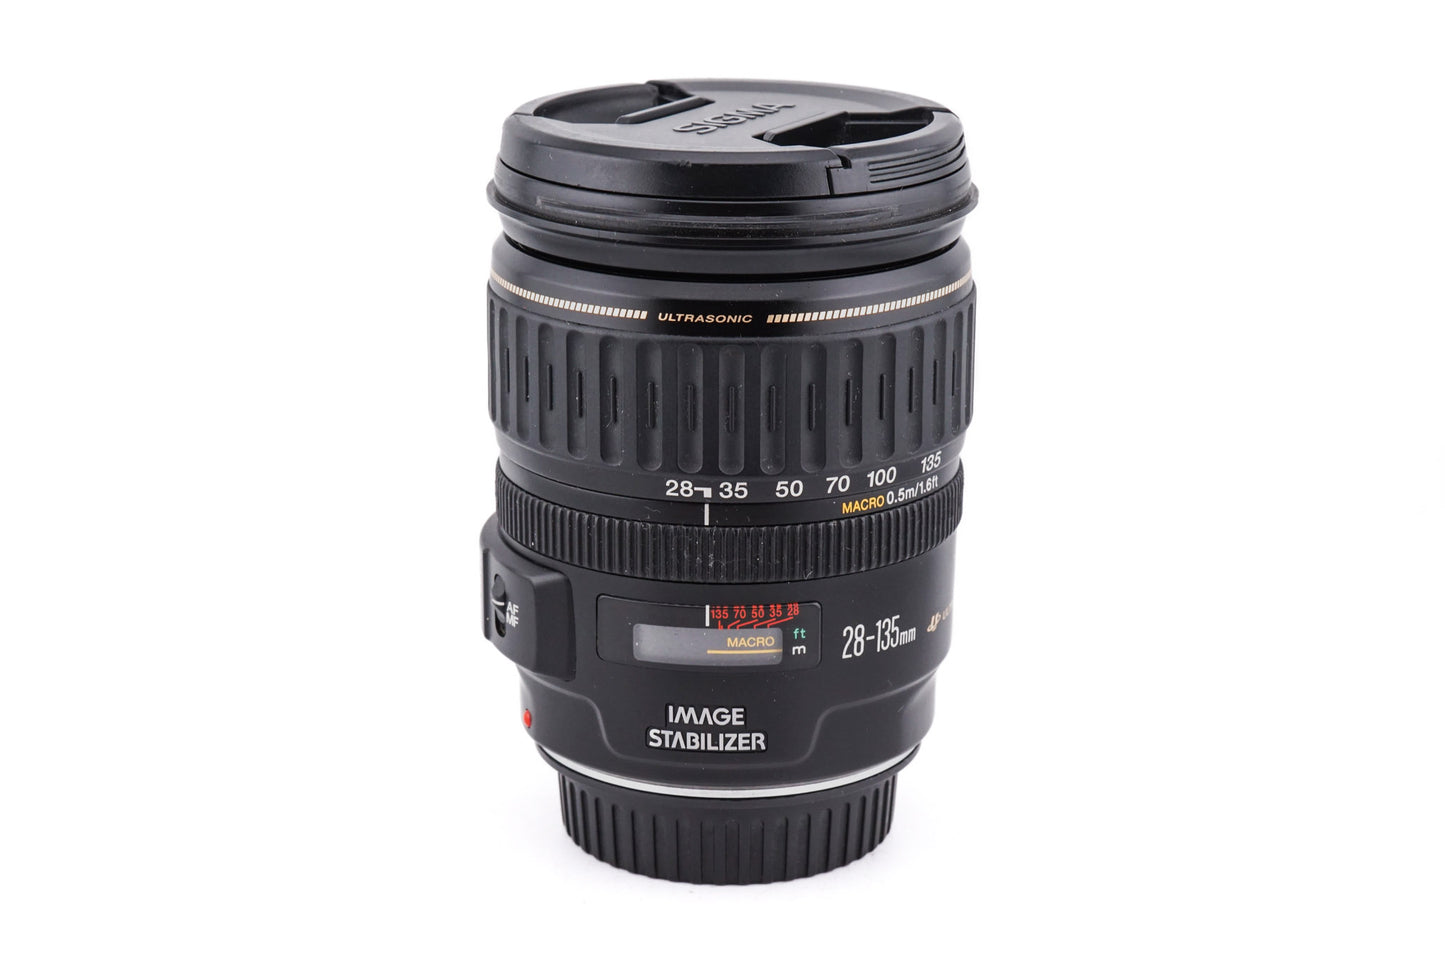 Canon 28-135mm f3.5-5.6 IS USM - Lens